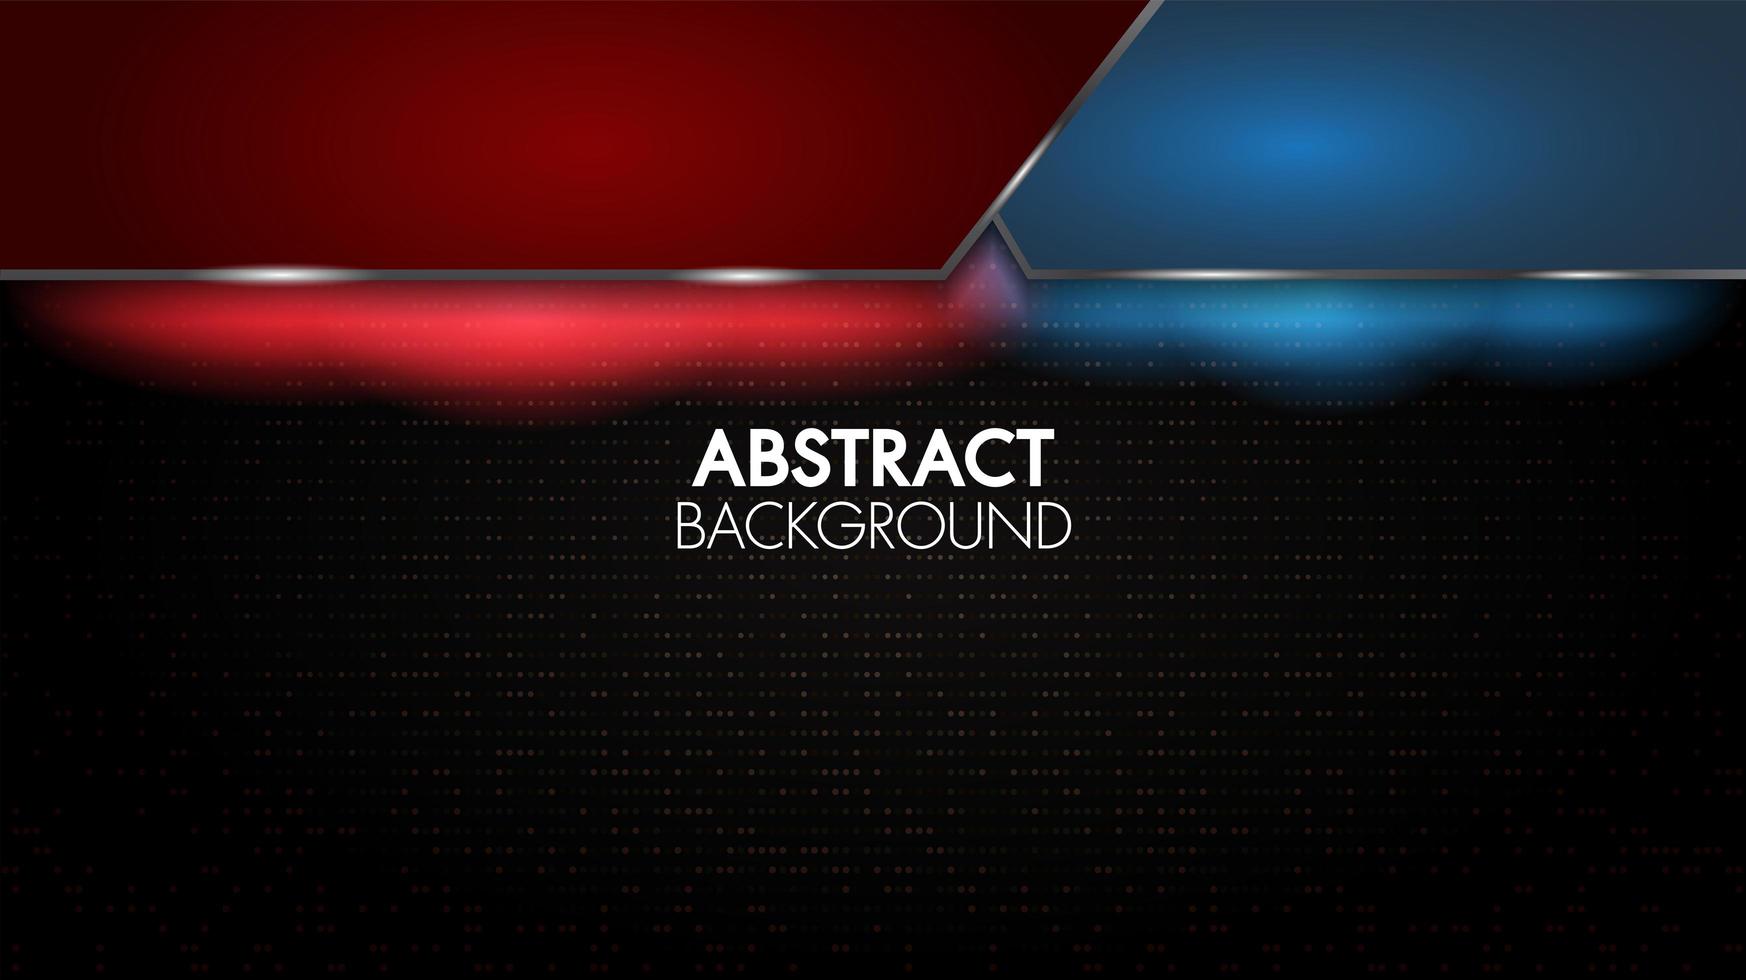 Black abstract geometric red and blue background vector